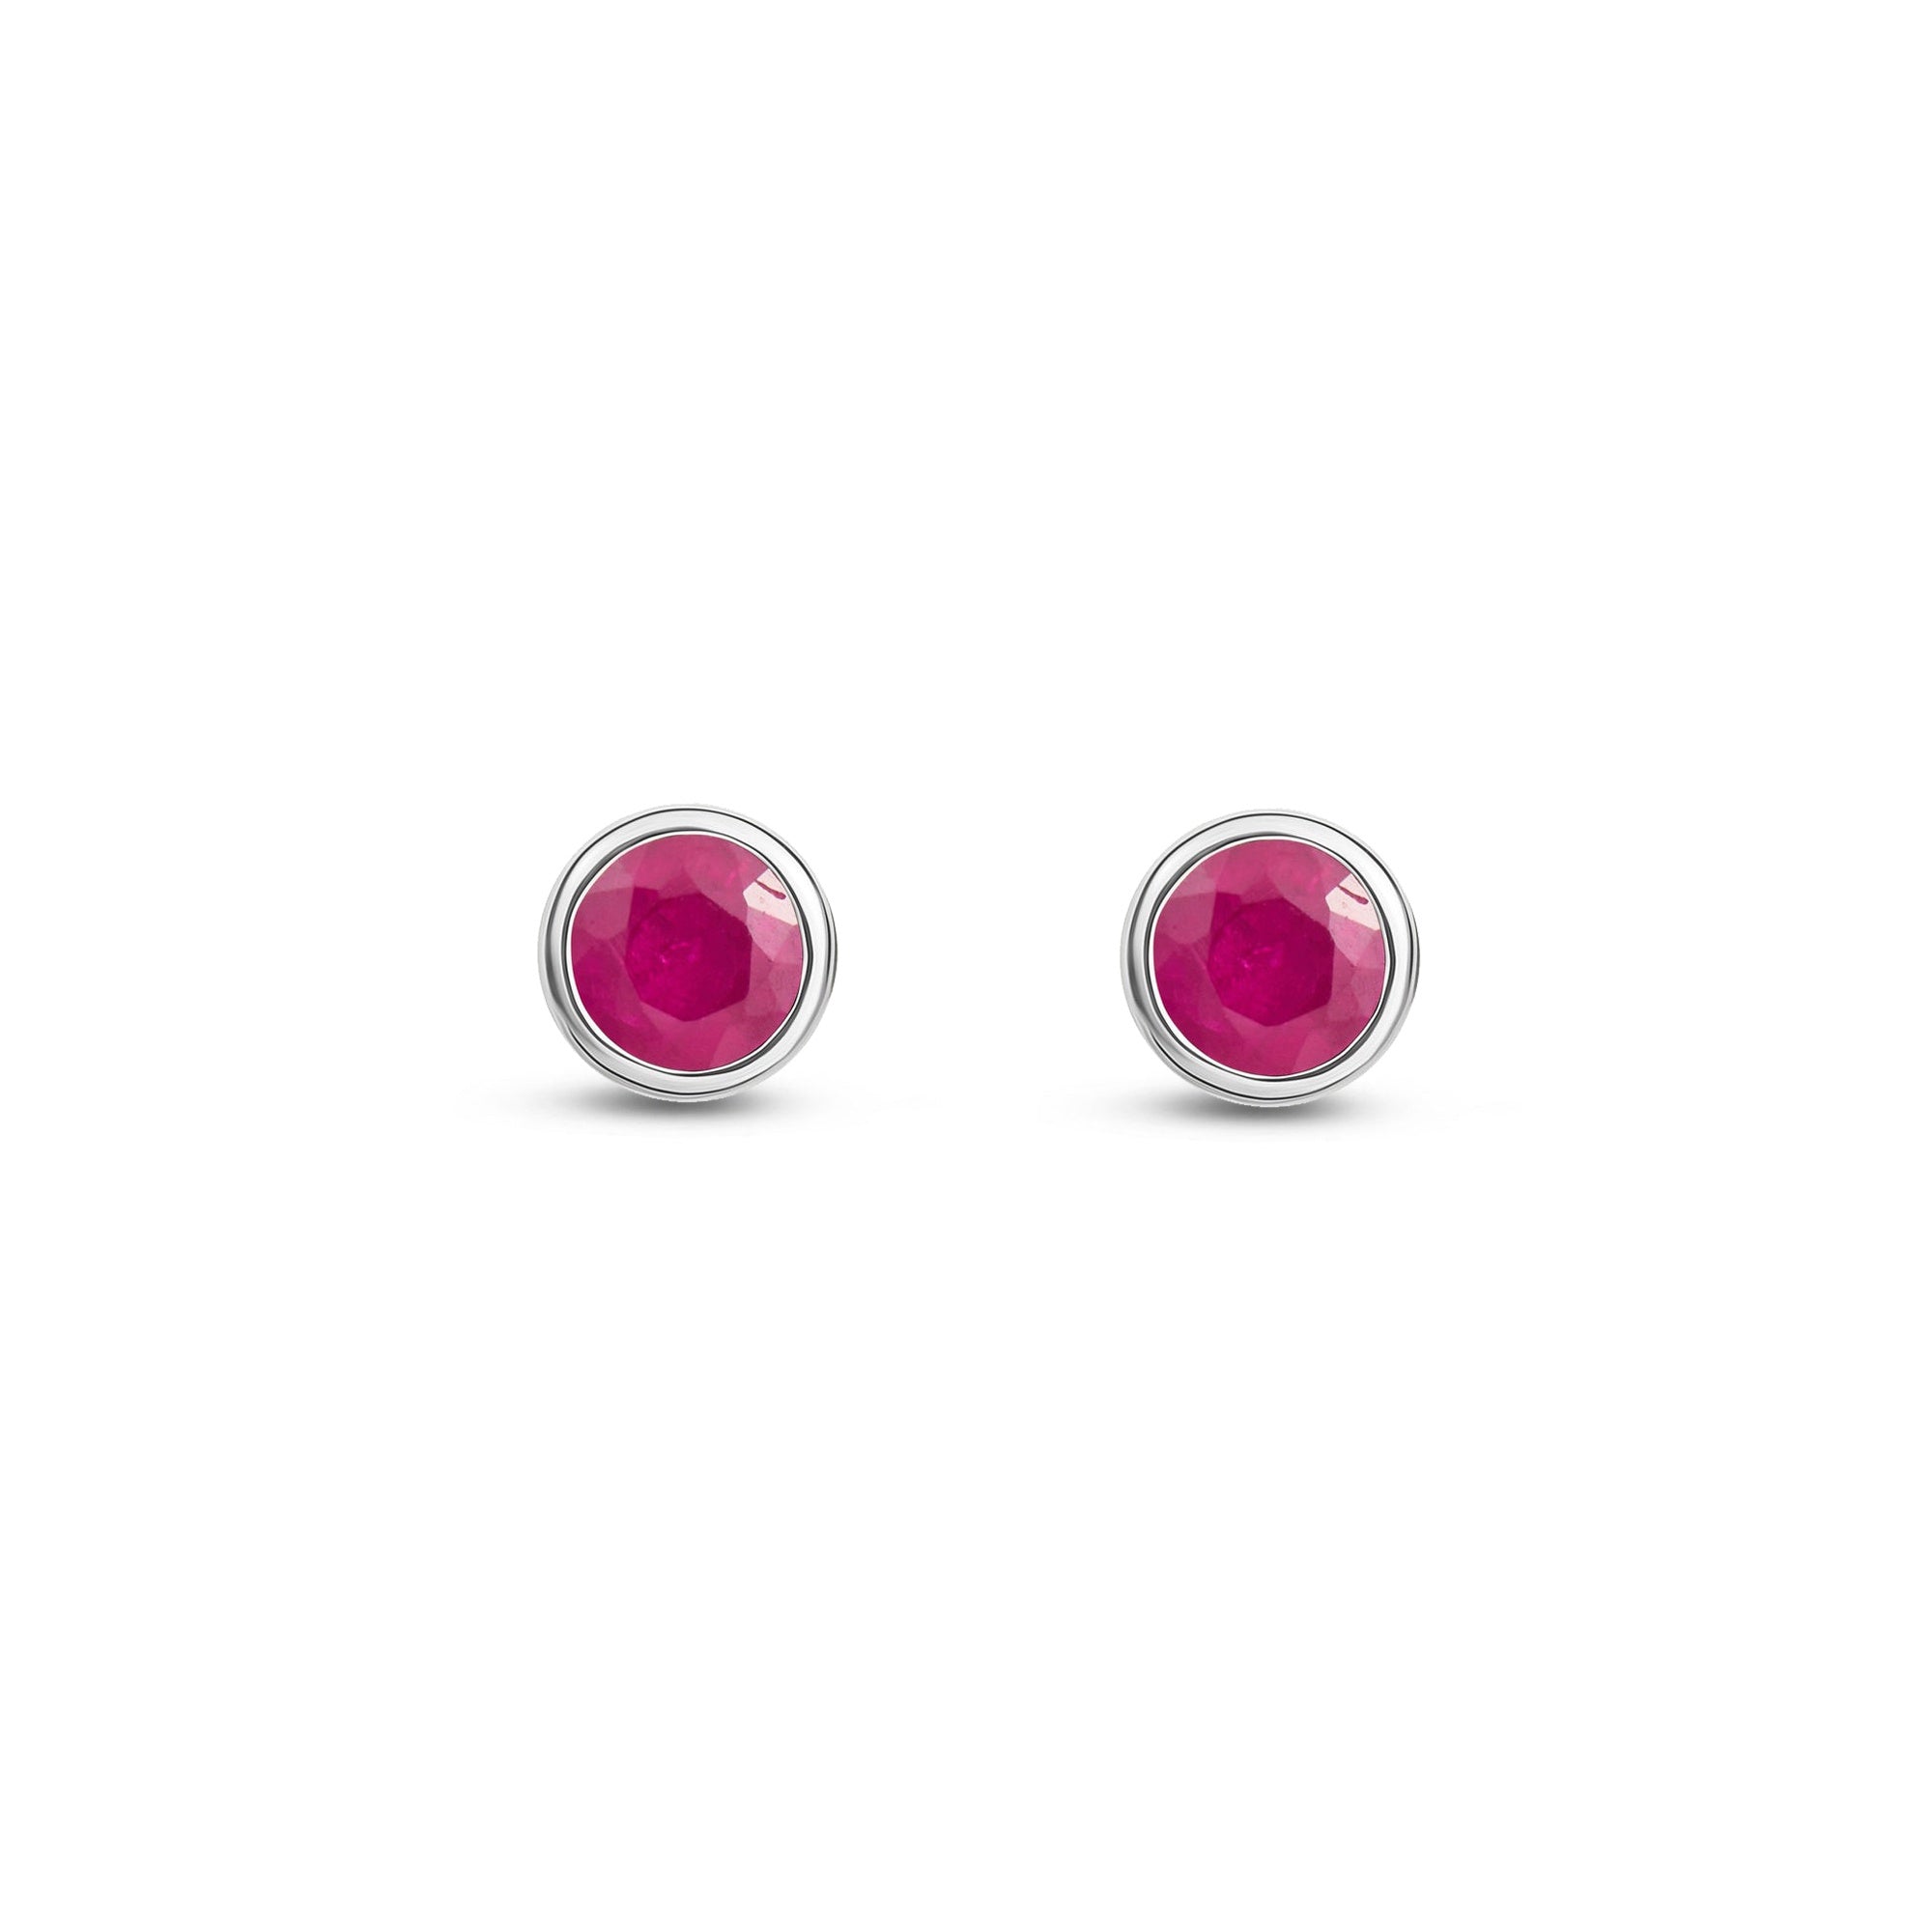 9ct White Gold 3mm Rubover Ruby Stud Earrings 0.28ct